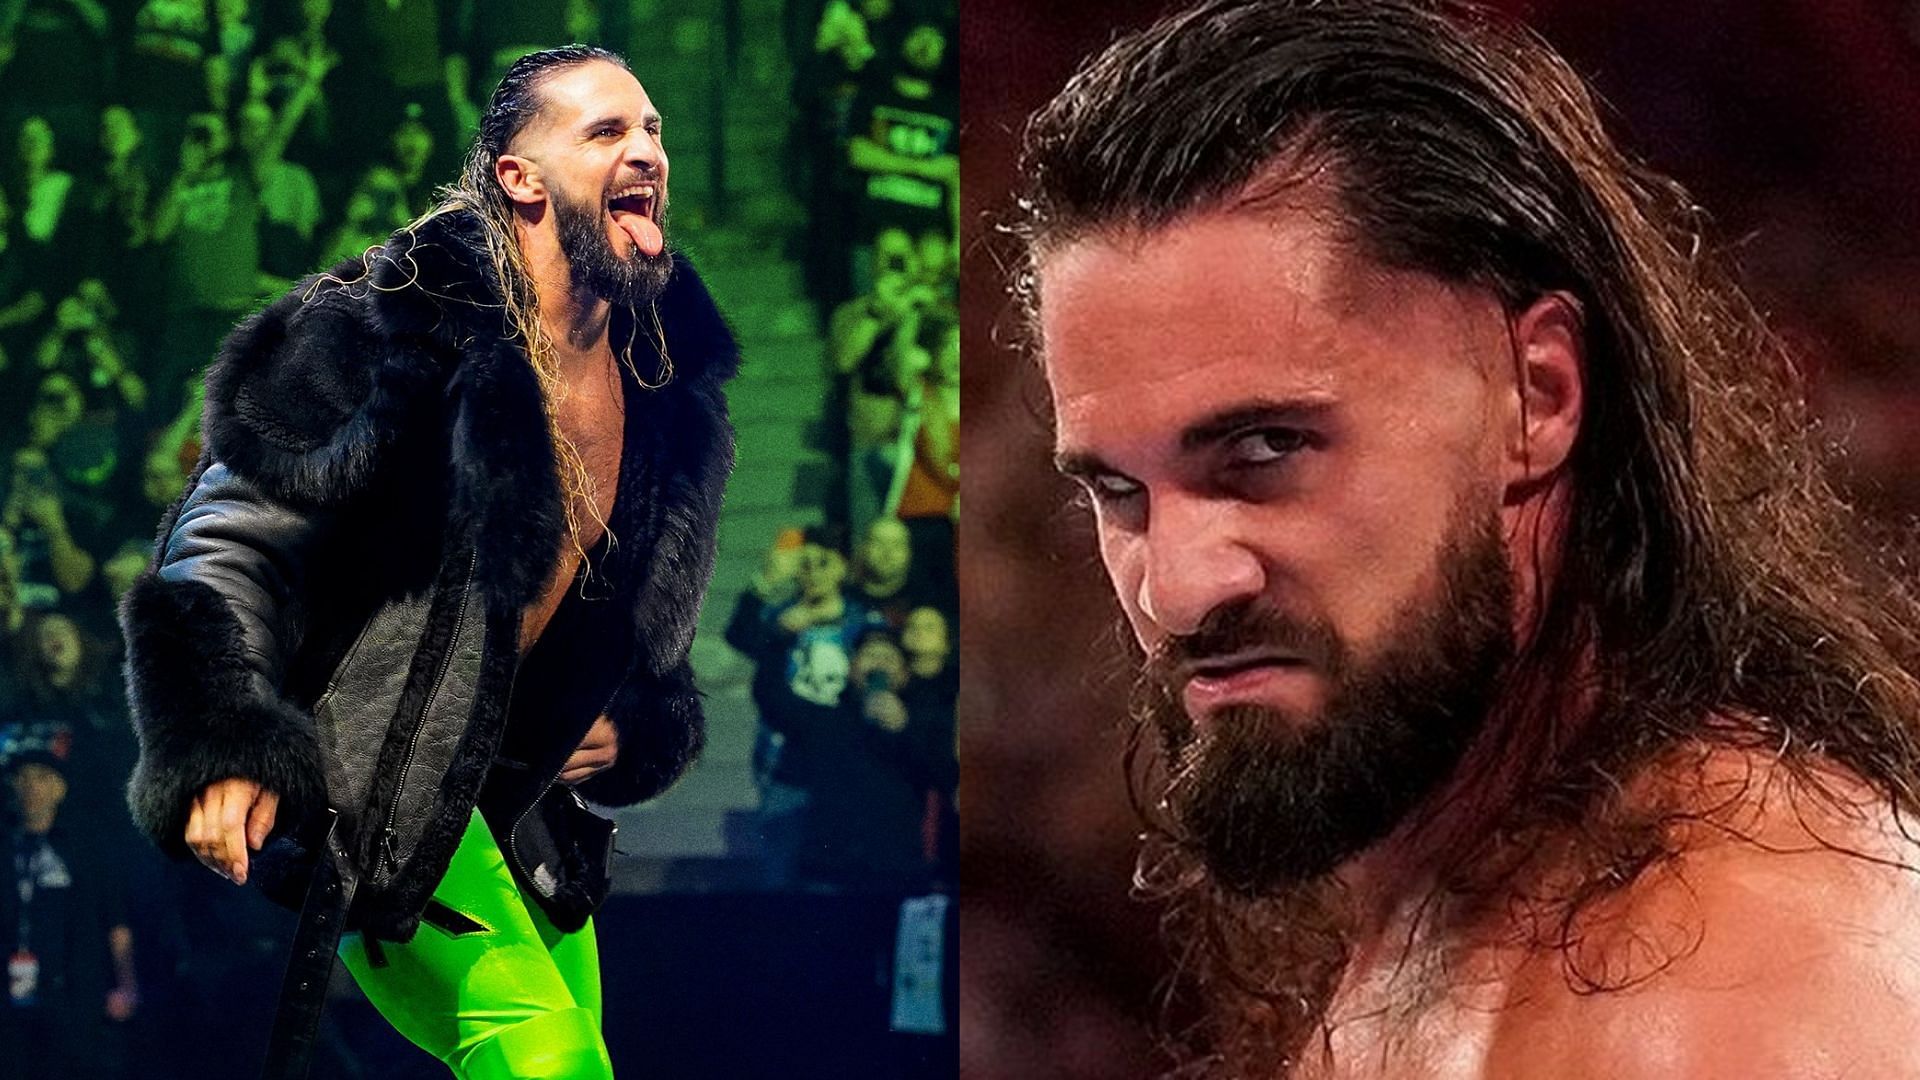 Seth Rollins is currently one of the biggest stars in WWE right now